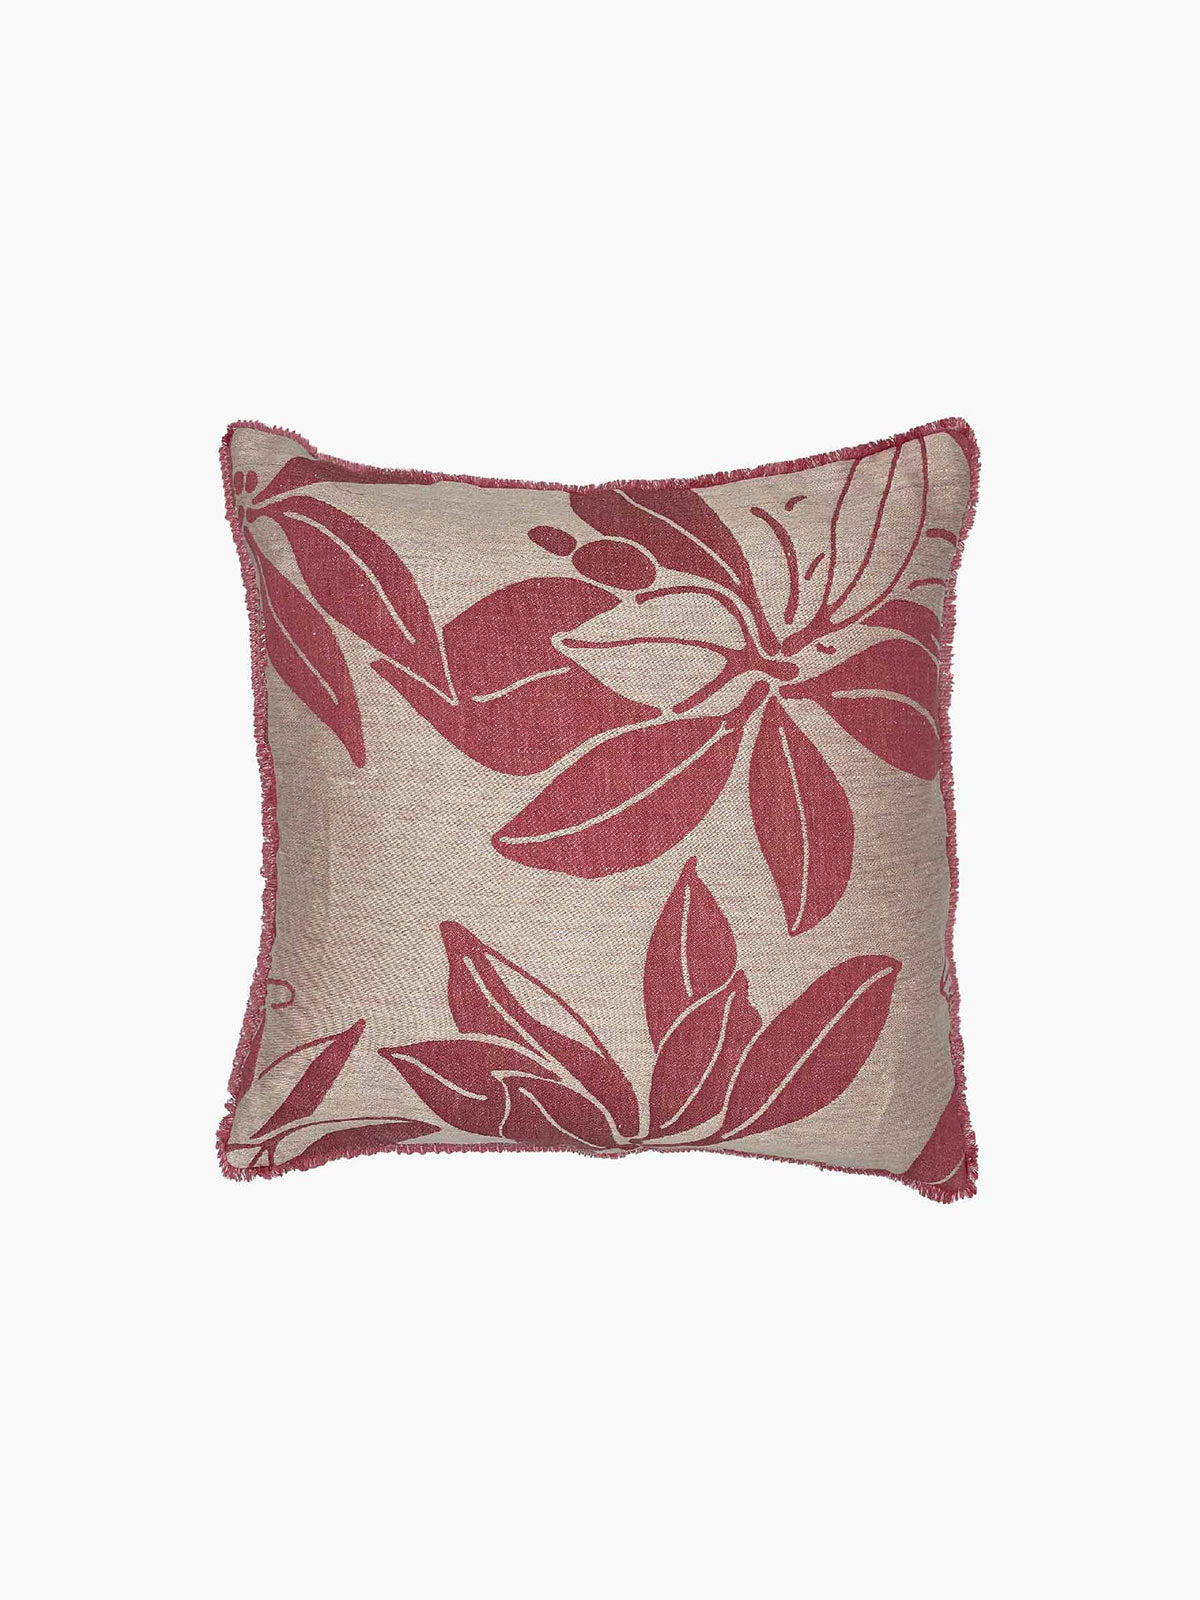 Cushion Cover With Recovered Fringe 45 x 45 | Guava Cushion Cover With Recovered Fringe 45 x 45 | Guava